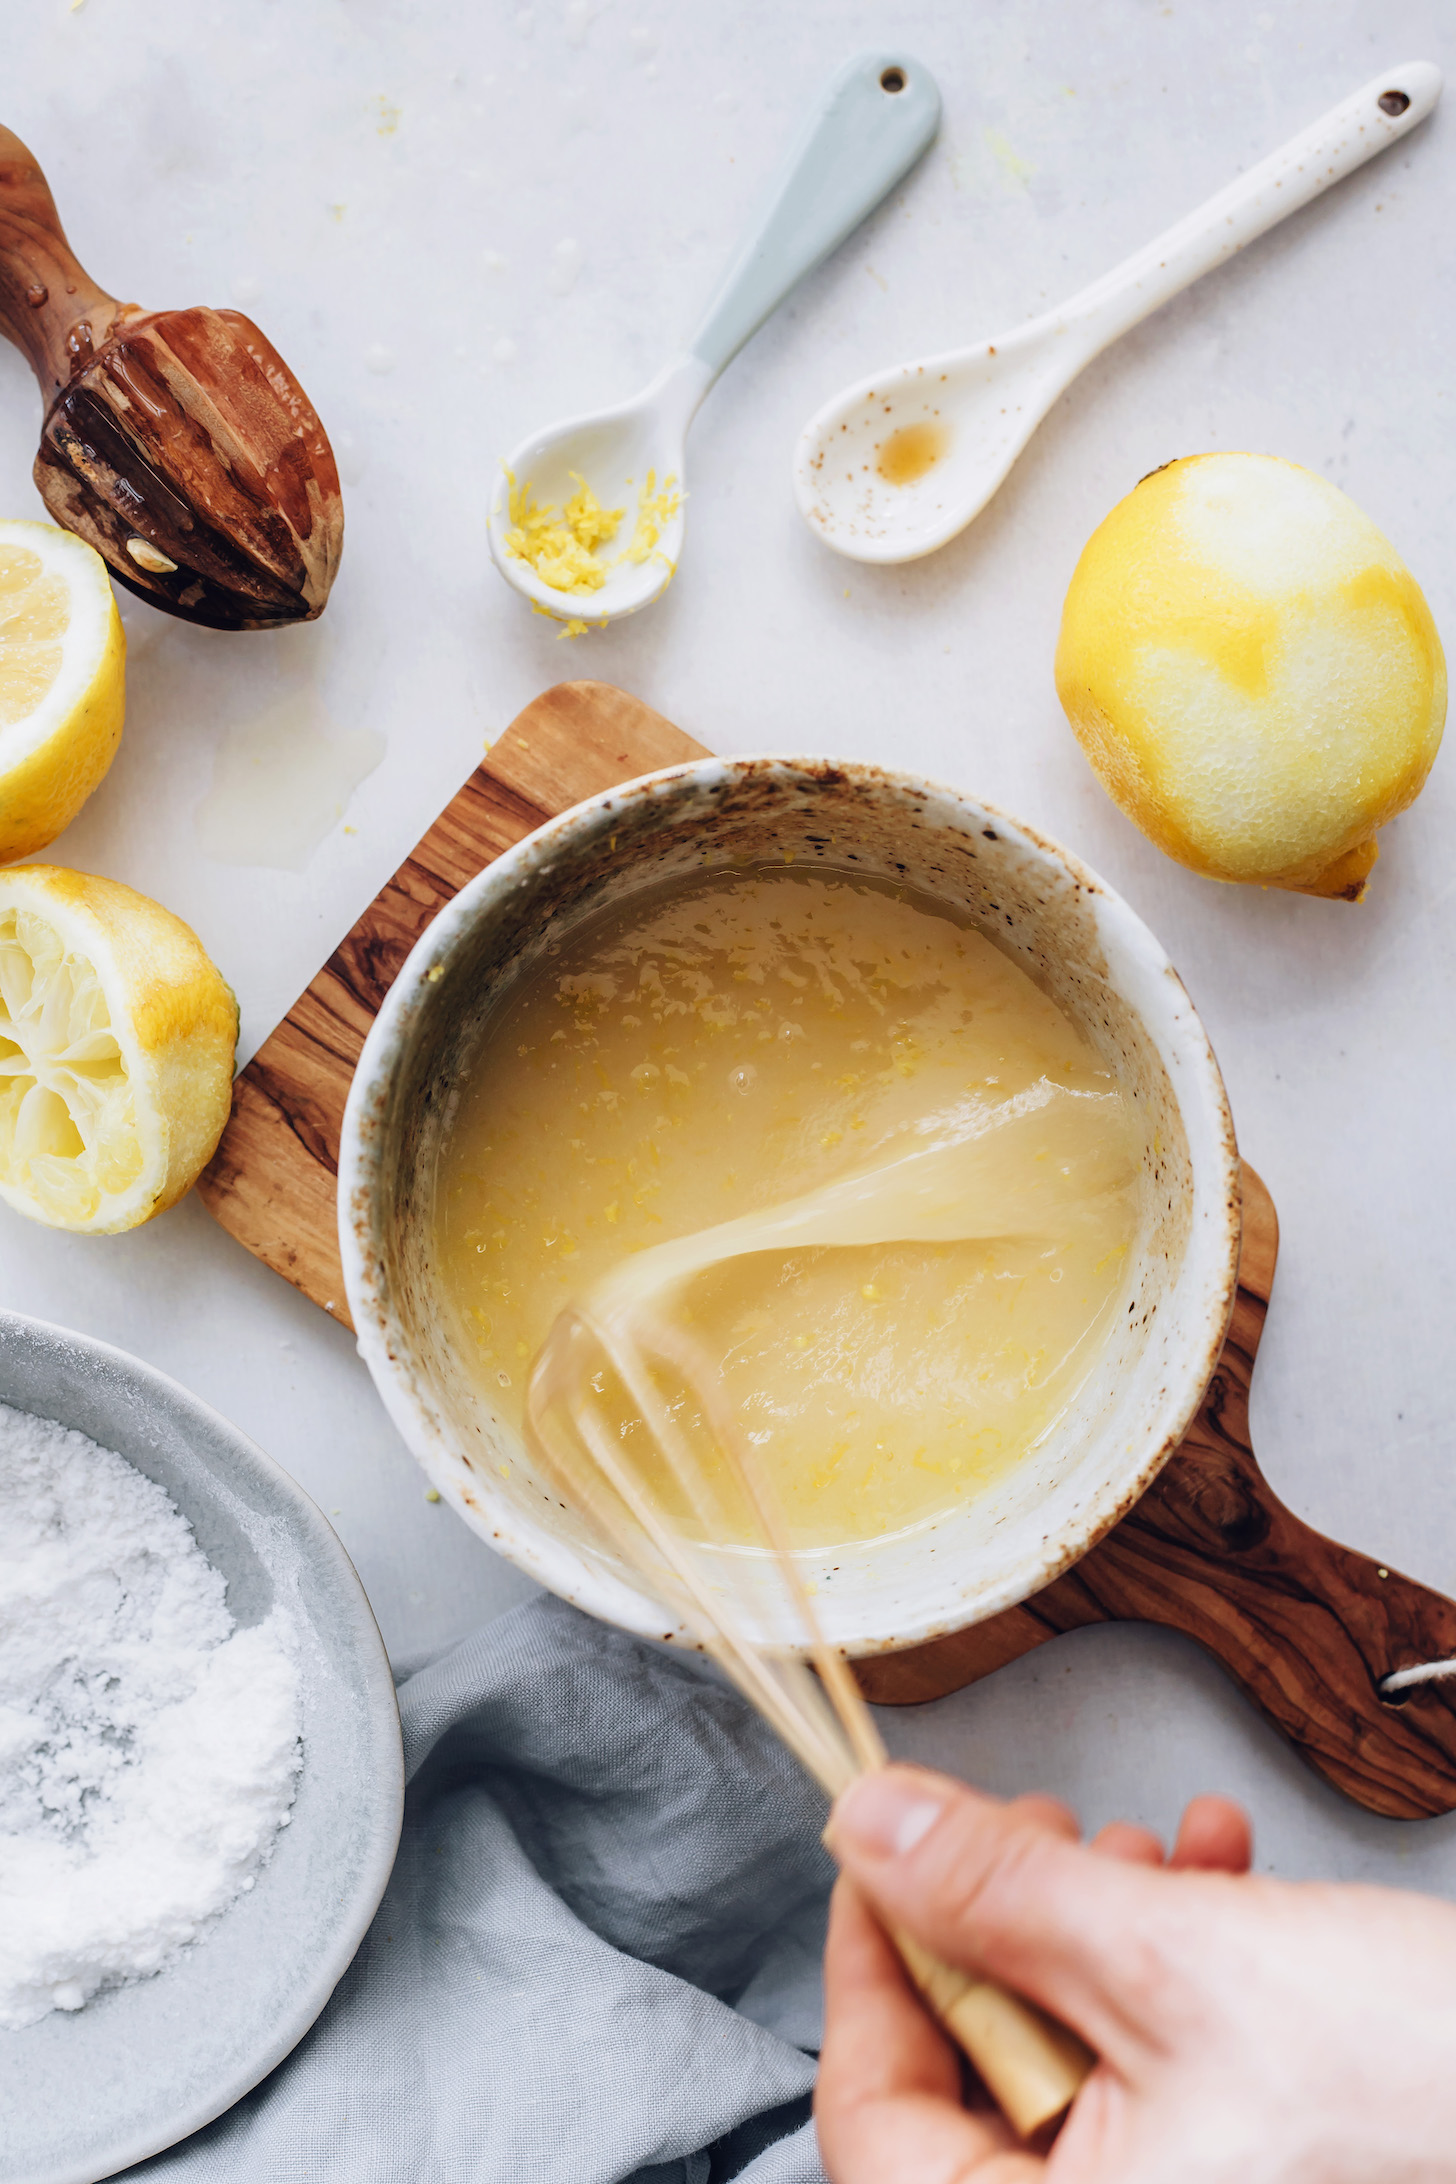 Whisking lemon glaze ingredients in a small bowl